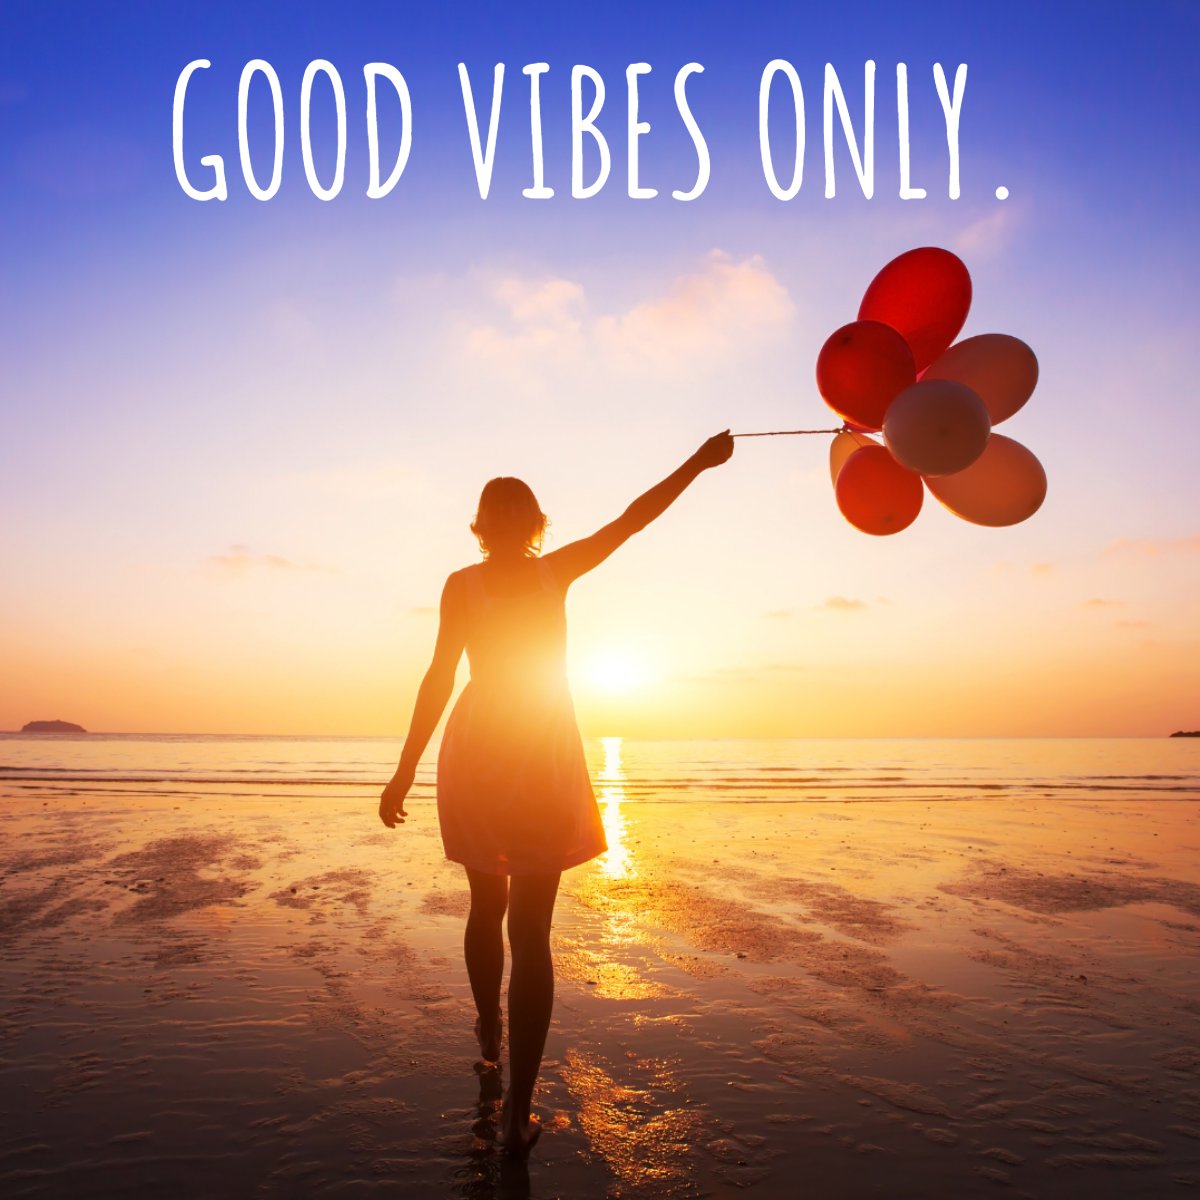 Good Vibes Only...🙆✌️

#goodvibesonly✌️ #vibes #goodvibes #positivevibes #goodquote #goodenergyonly #instagood
 #HoustonLuxuryHomes #HoustonHomeShopping #HoustonRealtor #htxrealestate #Houstonbuilders #HoustonBlackRealtors #DFWRealtor #HoustonRealestateAgent